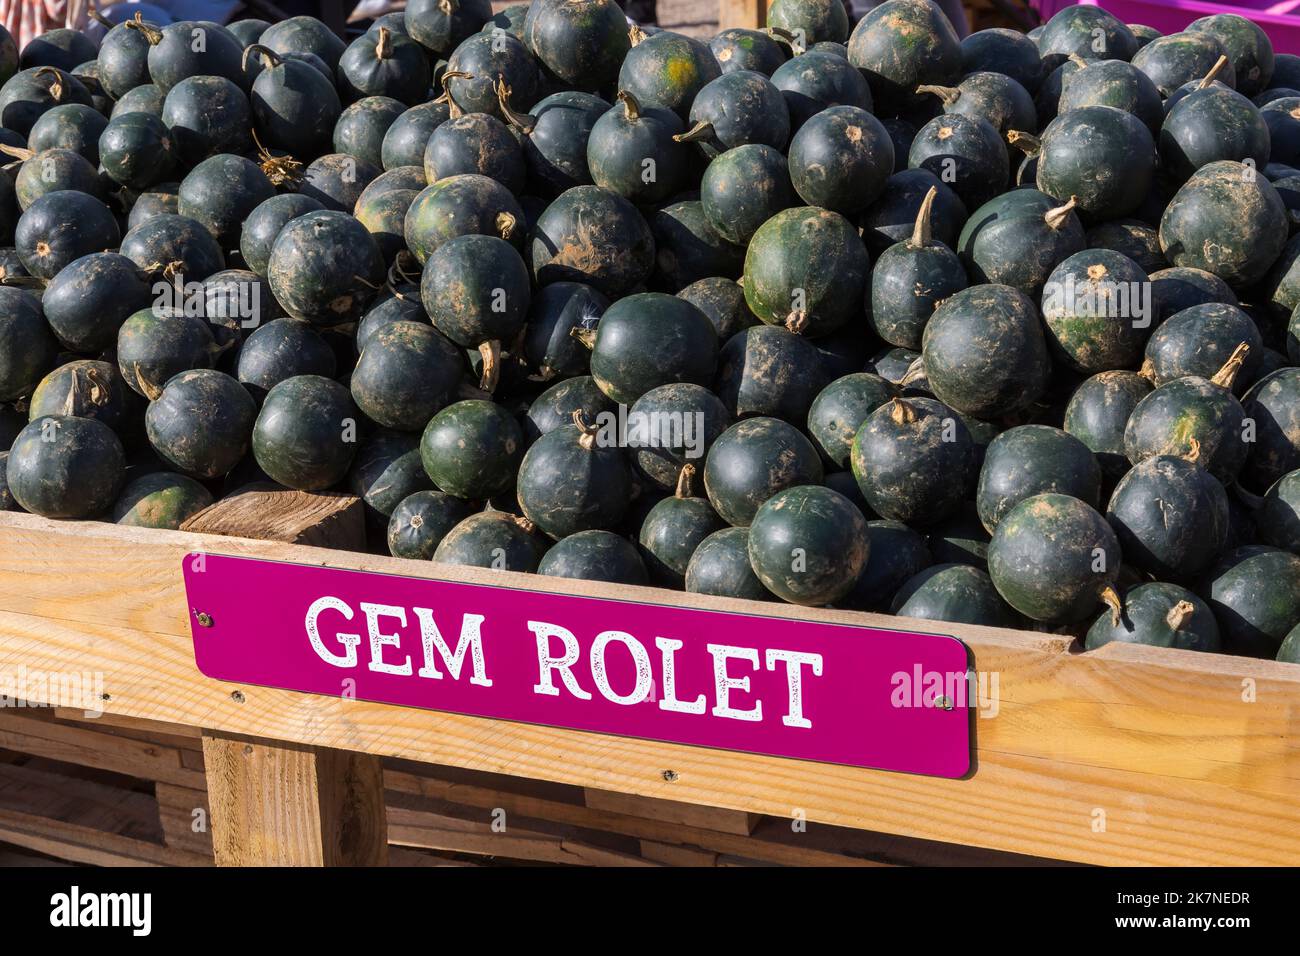 Pumpkin Time at Sunnyfields Farm in Totton, Hampshire UK in October as Halloween approaches - Gem Rolet squash for sale Stock Photo